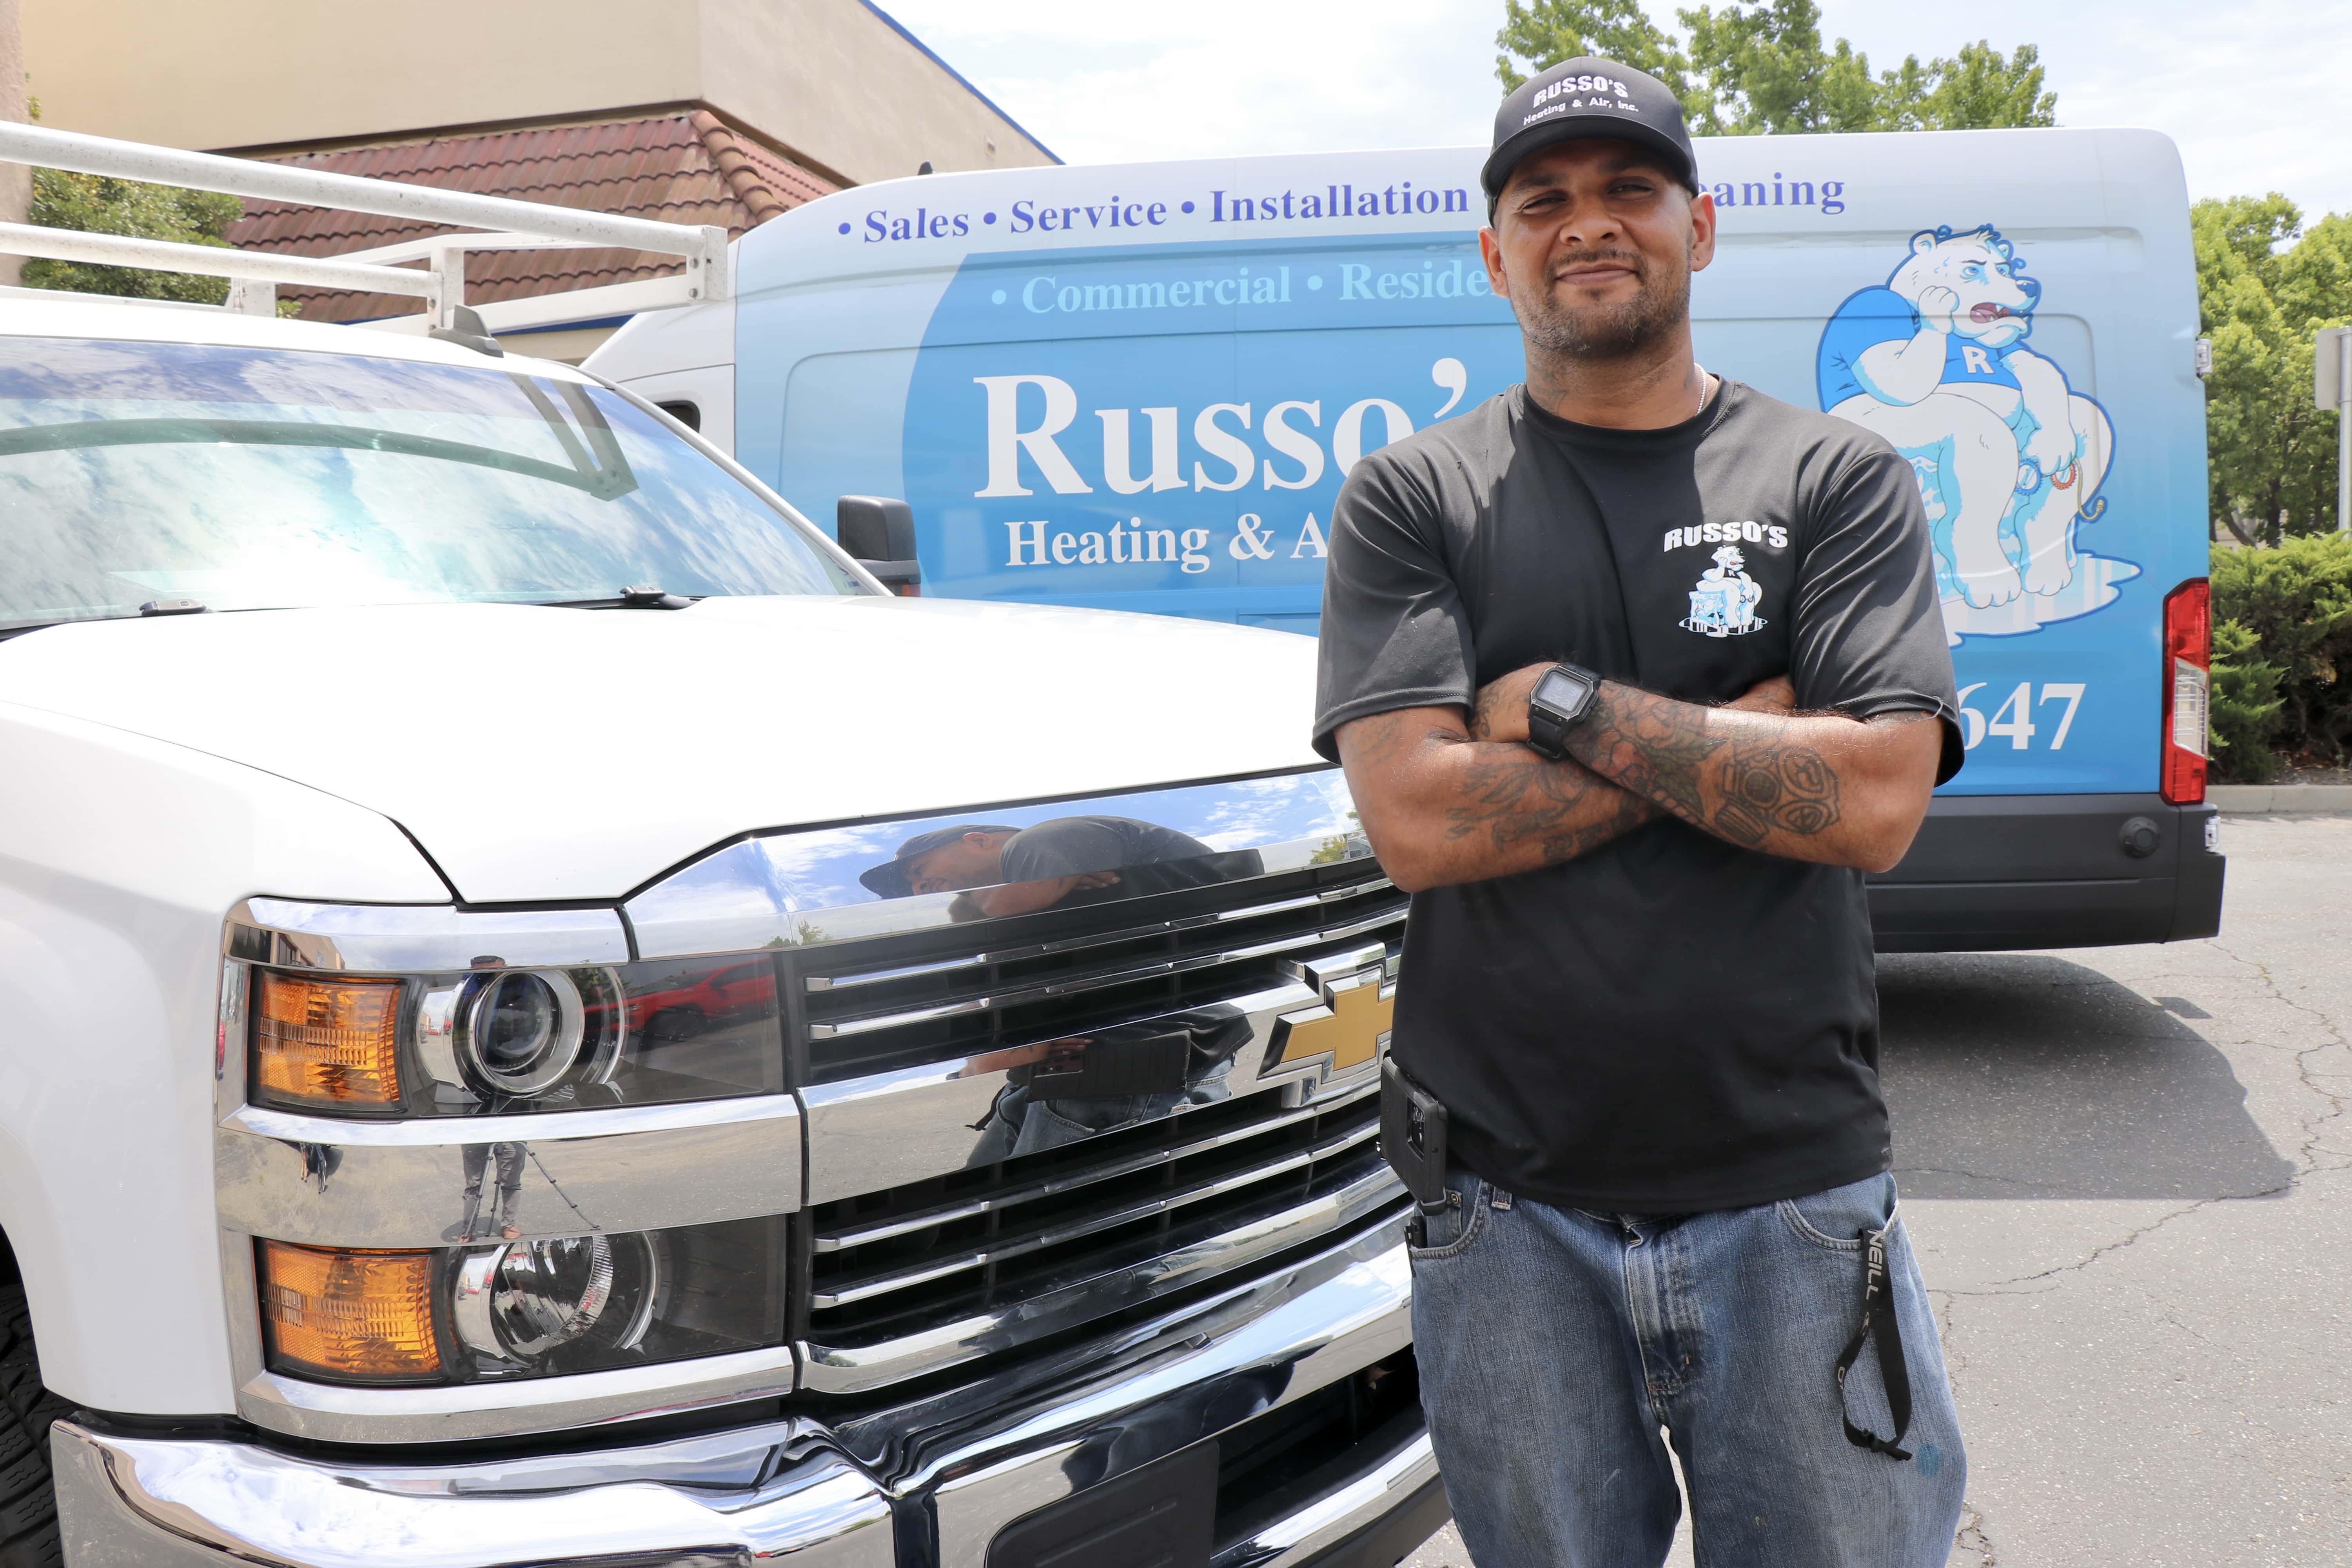 Russo's Heating & Air Conditioning - Stockton, CA, US, home ac repair near me